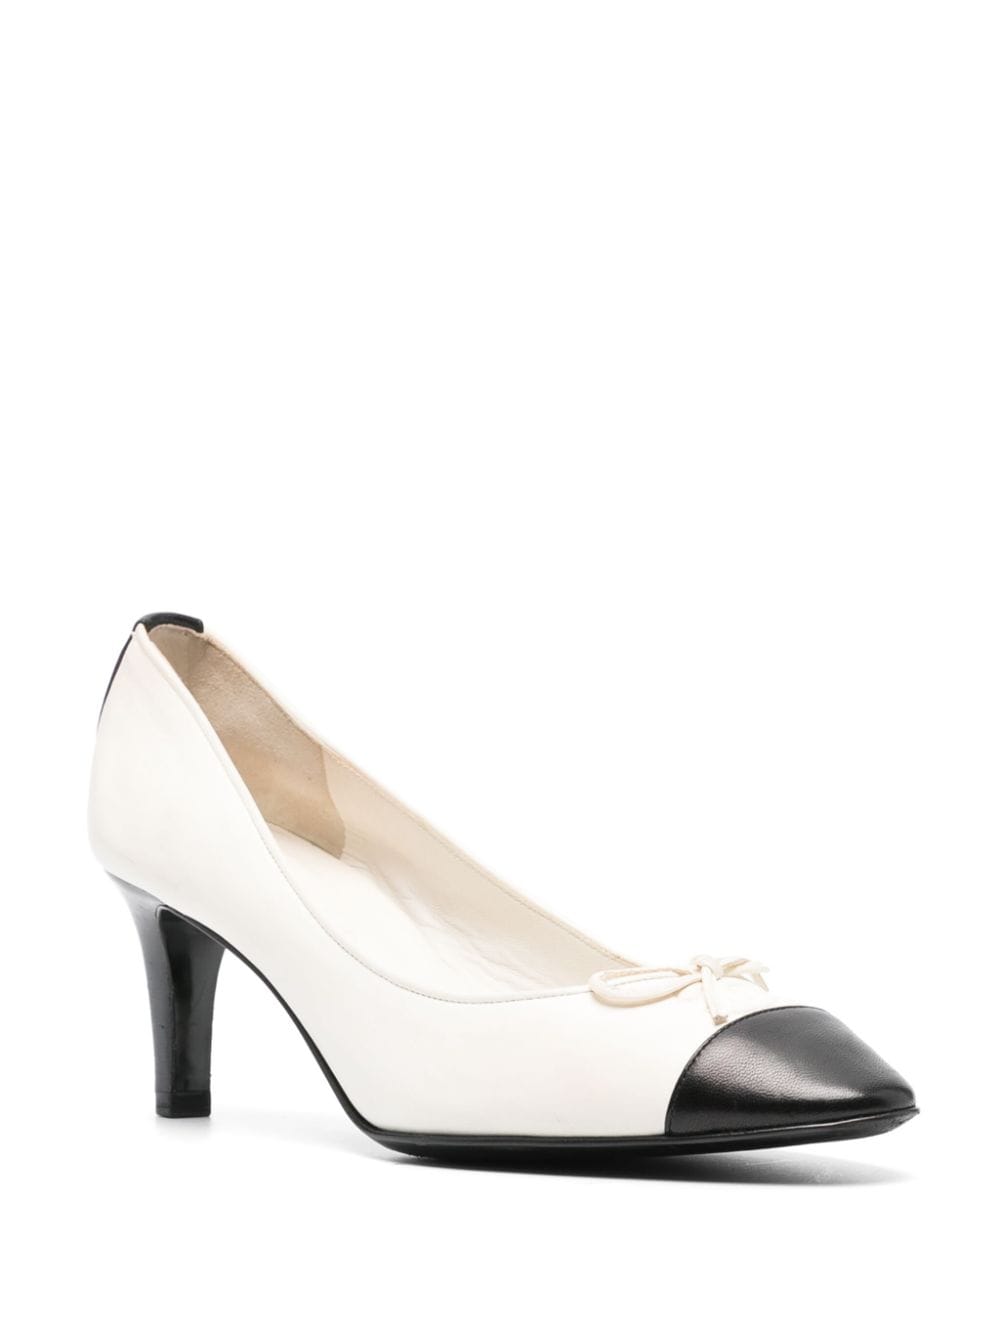 Pre-owned Chanel 1990s Contrasting Toe Pumps In White